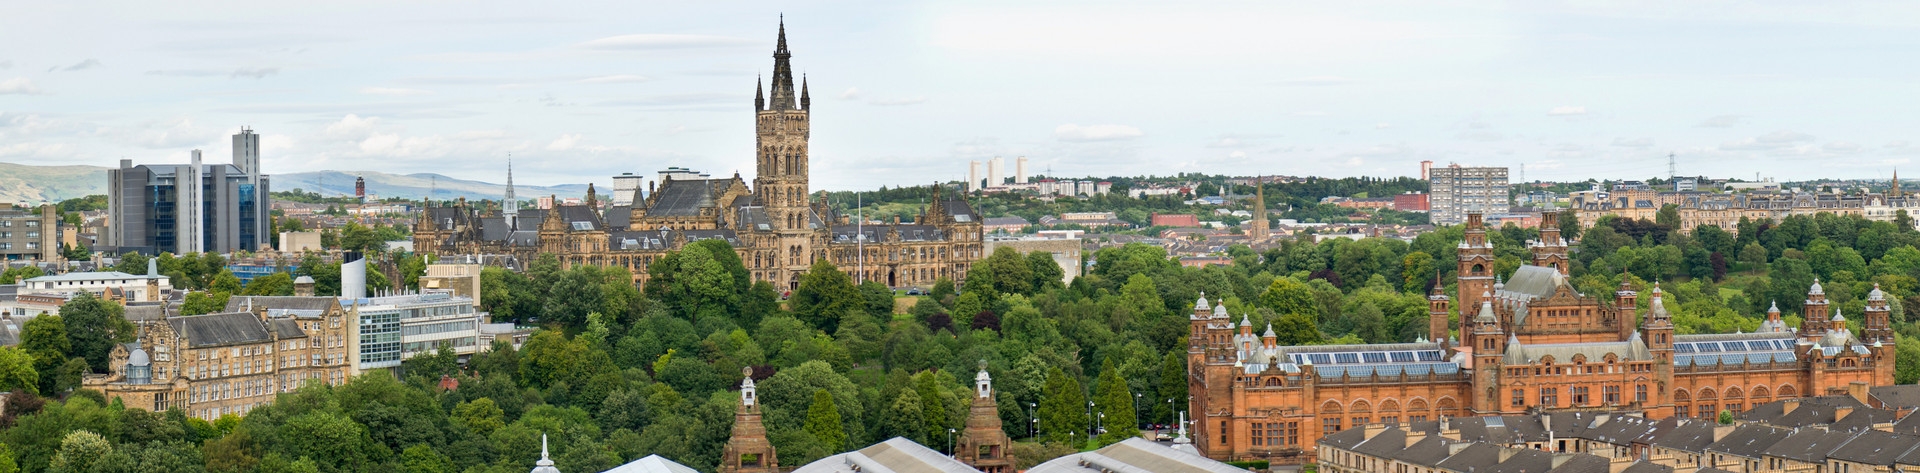 University of Glasgow surrounded by a park and Kelvingrove Museum.